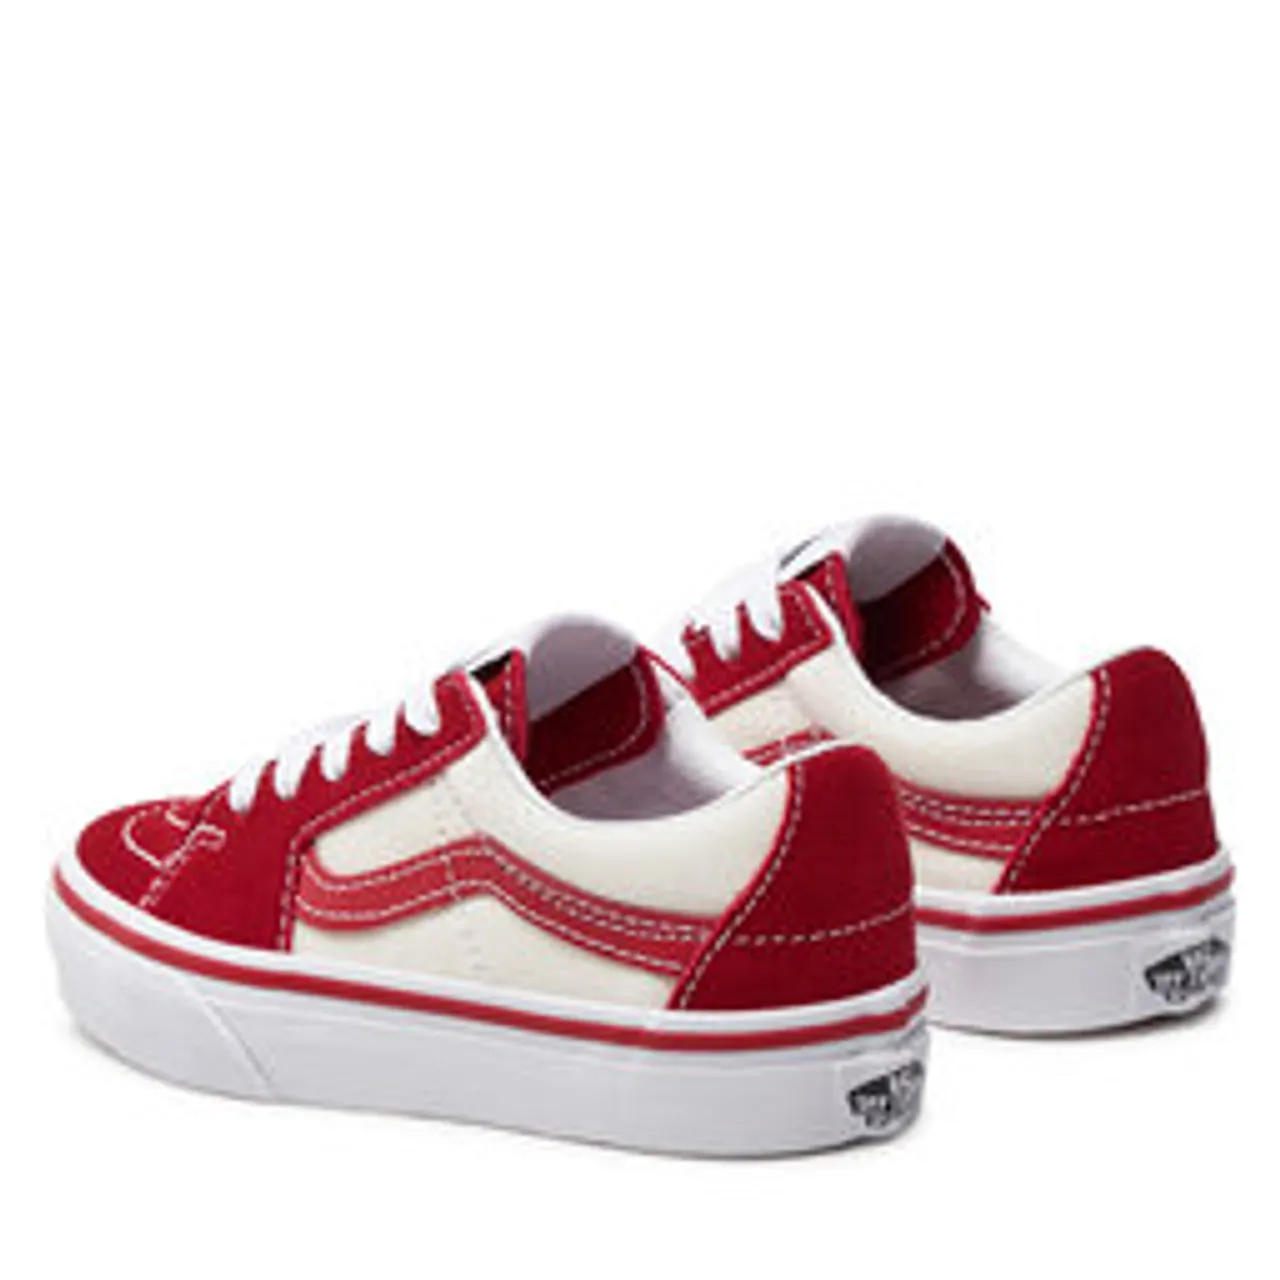 Sneakers aus Stoff Vans Uy Sk8-Low VN0A7Q5LCIS1 Red/Marshmallow